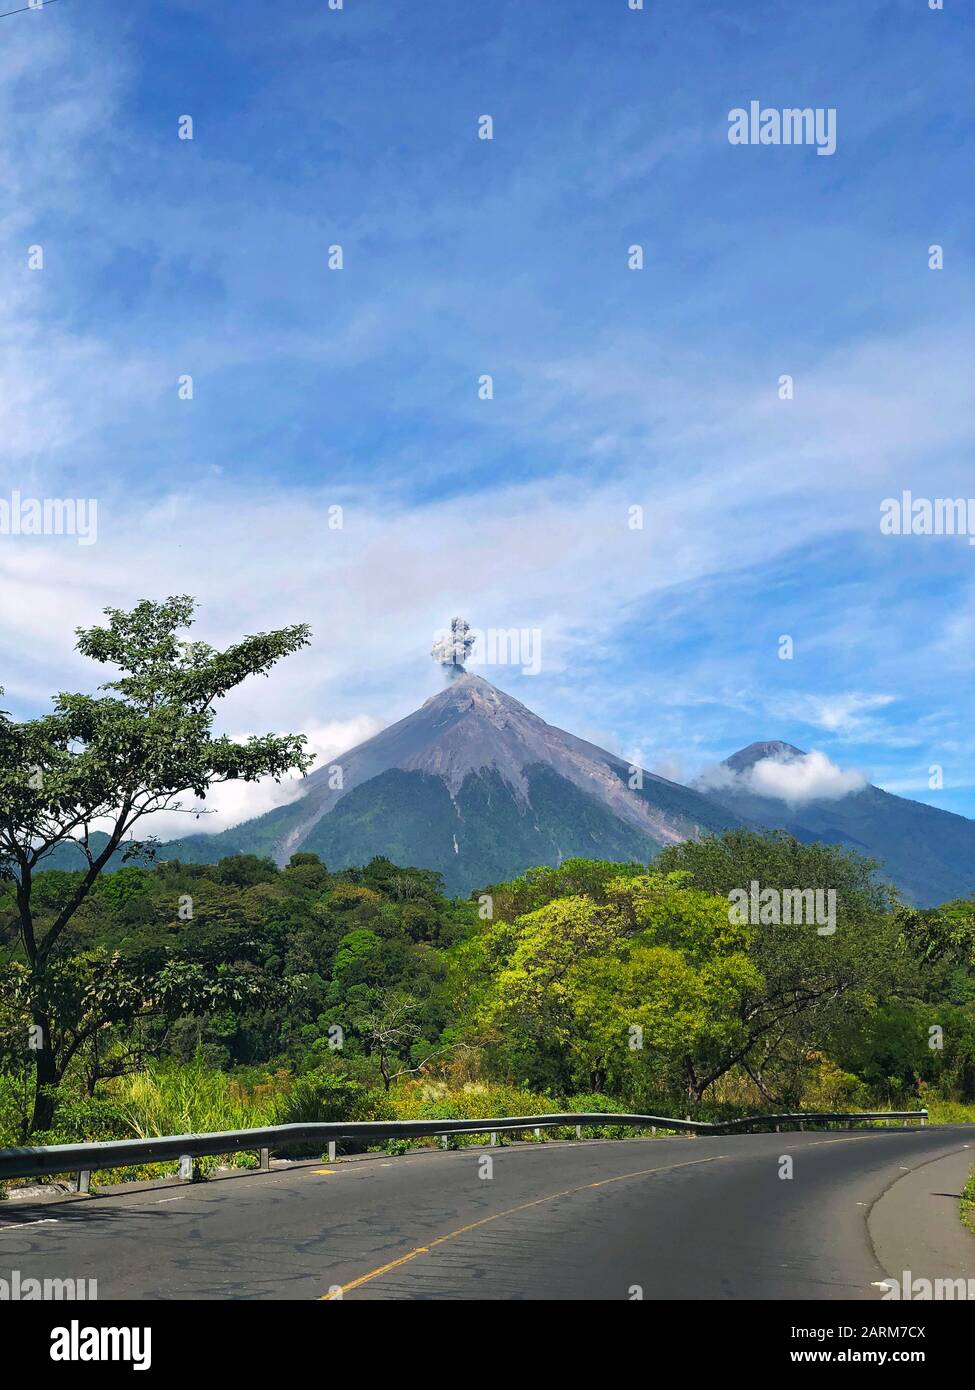 Guatemala's Fuego and Acatenango Volcanoes seen from a highway Stock Photo